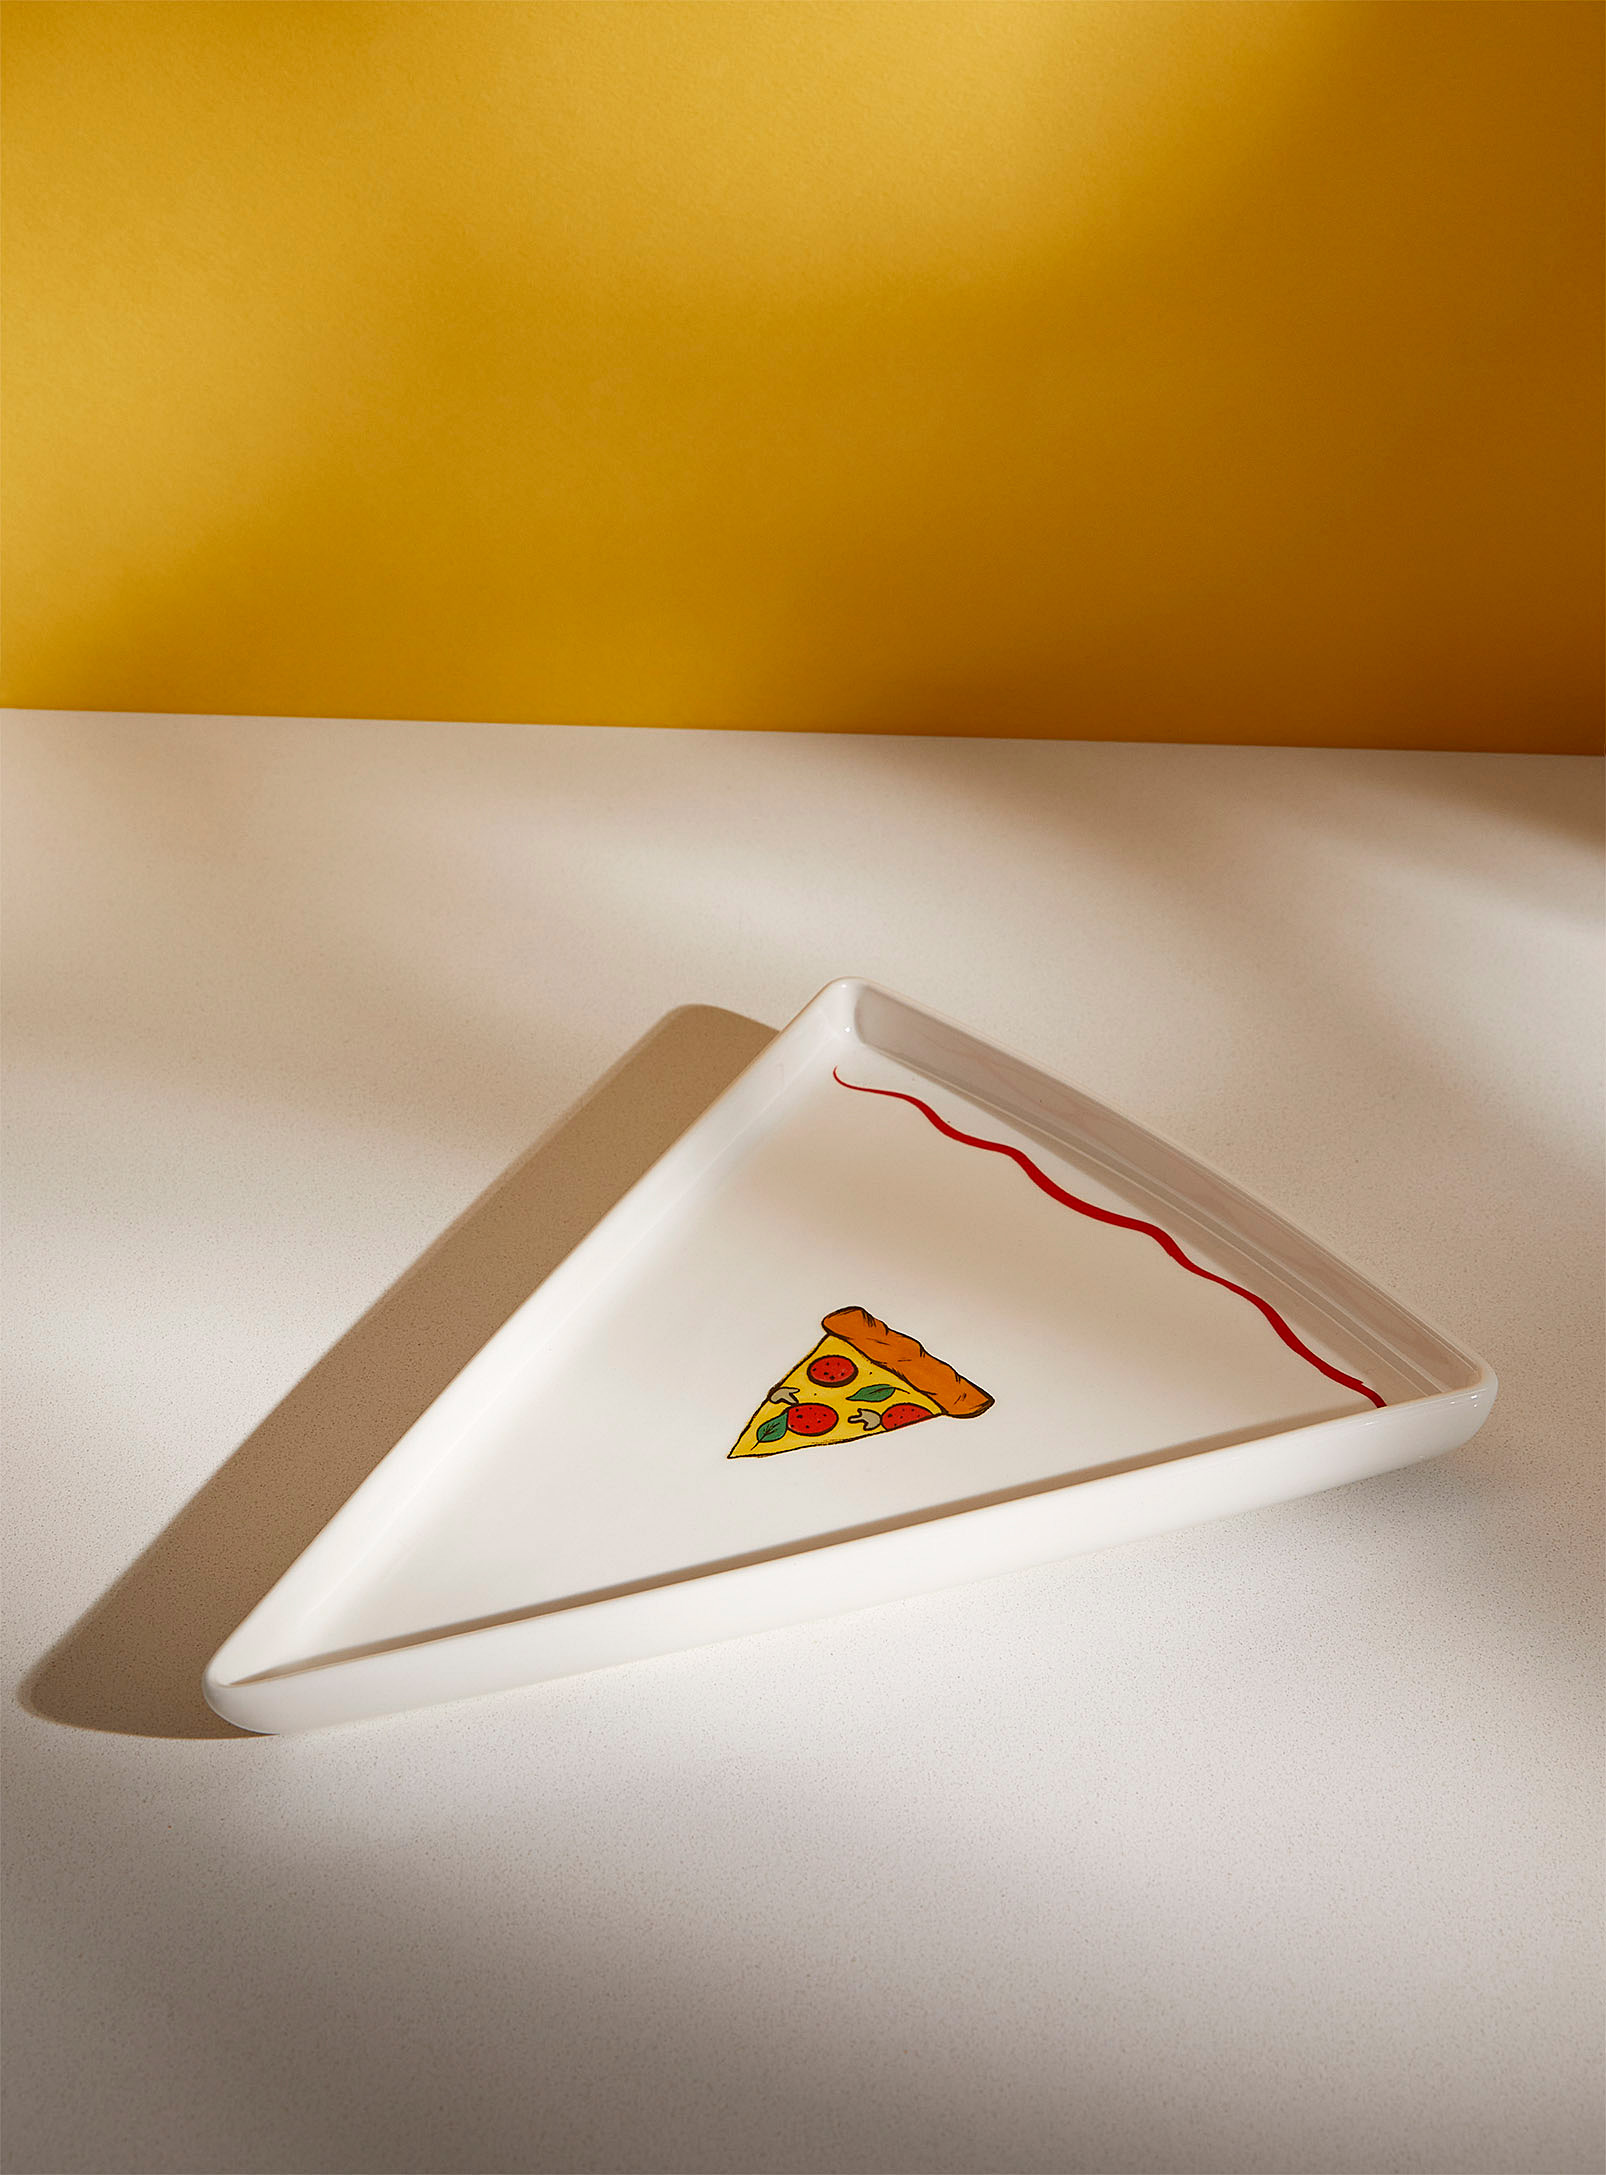 Simons Maison Pizza Slice Plate In Patterned White